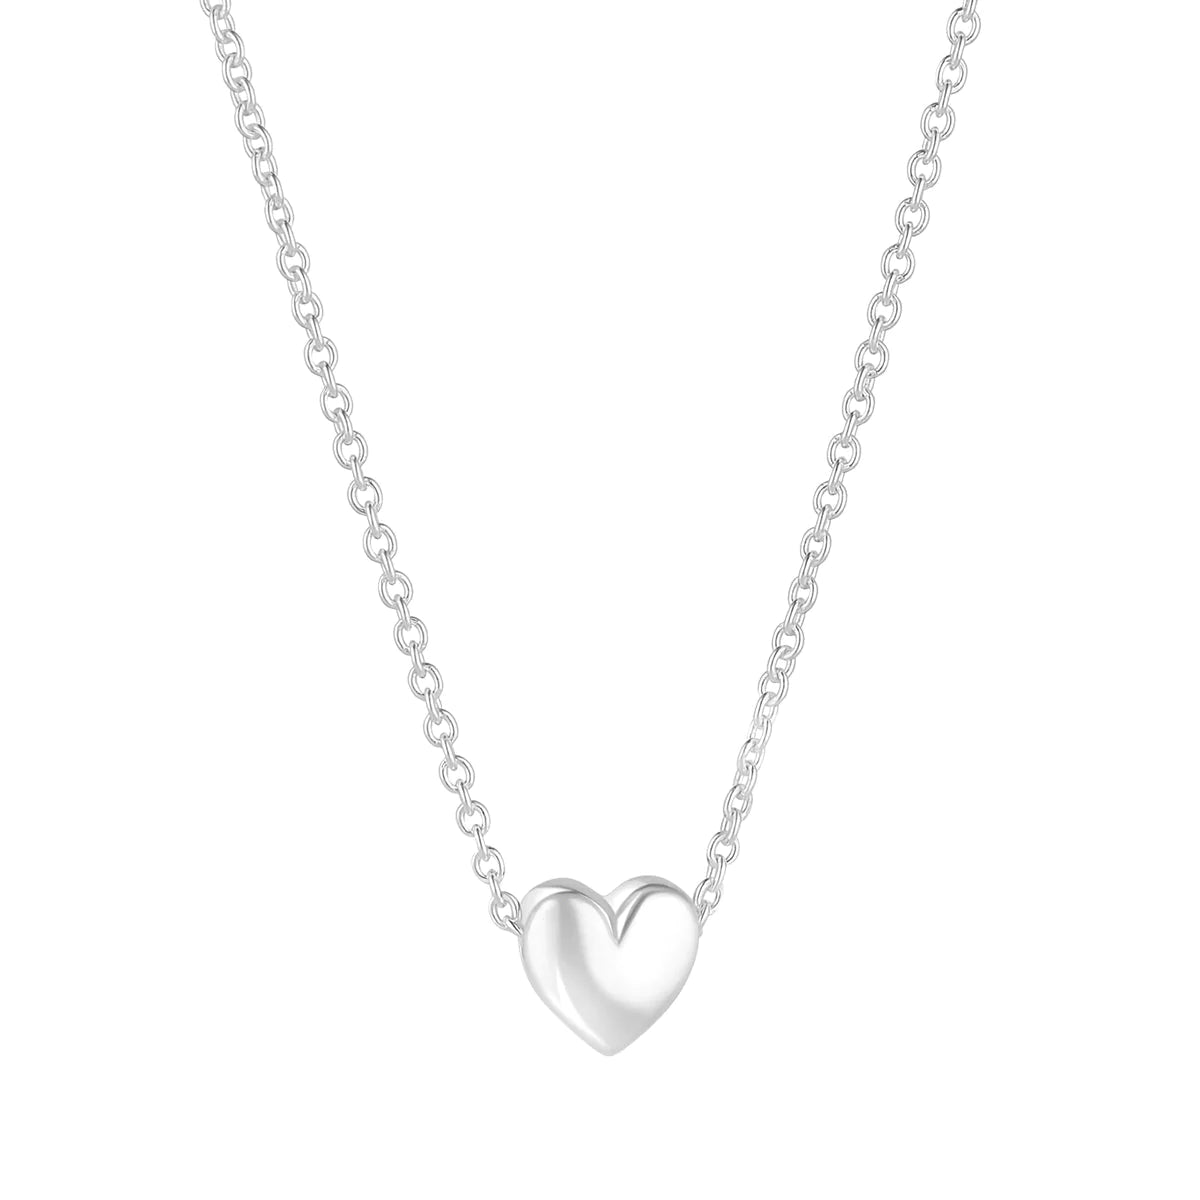 STERLING SILVER SMALL HEART NECKLET